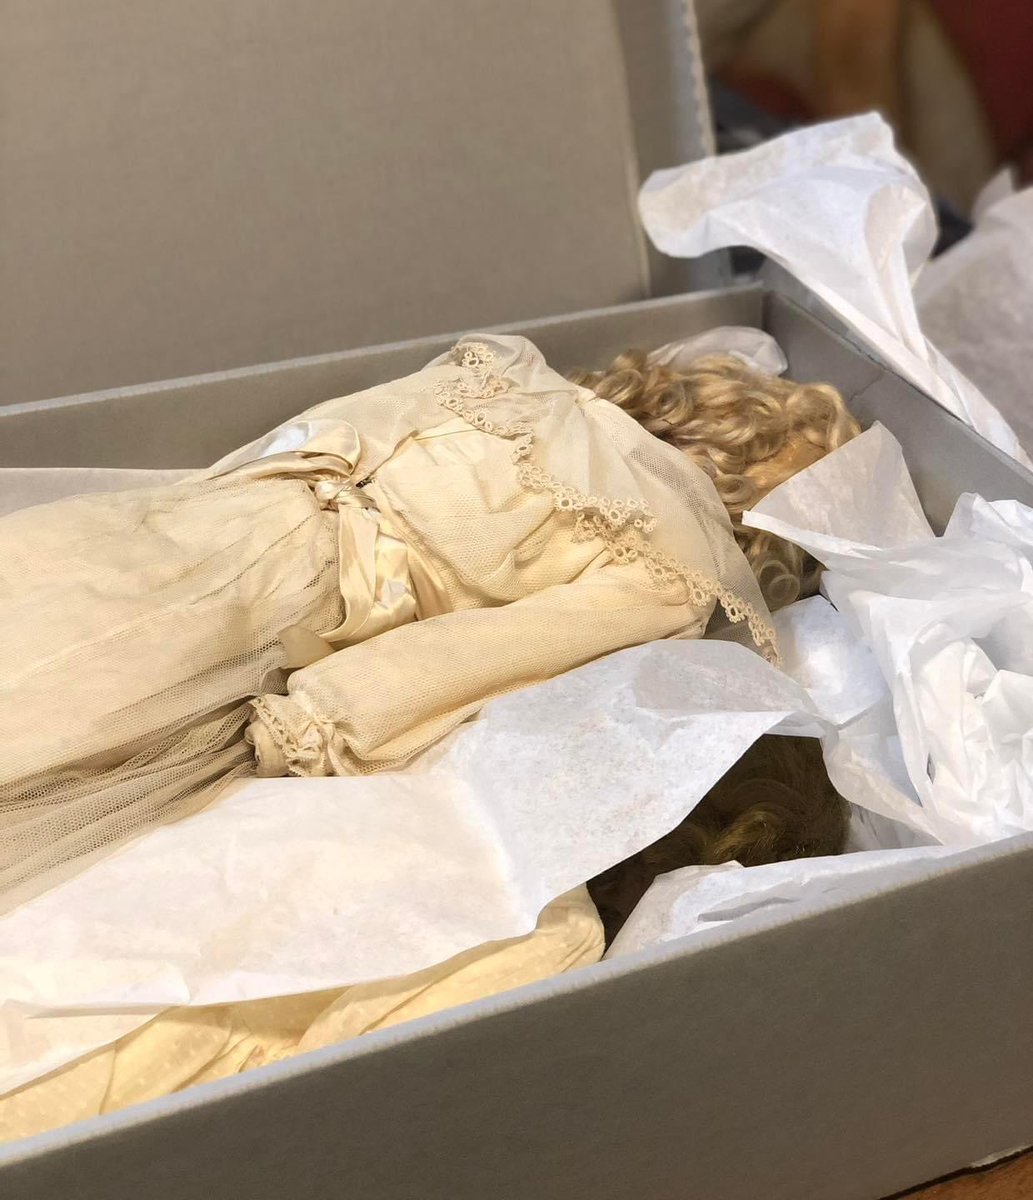 Don't think the beauty sleep is working? The #creepydolls think they look better than YOU will in 100 years!

“Storing dolls face down is best... Stationary eyes can be vulnerable to gravity in storage and may become detached if stored face-up.' 
- Melissa Amundsen, @PreserveArt